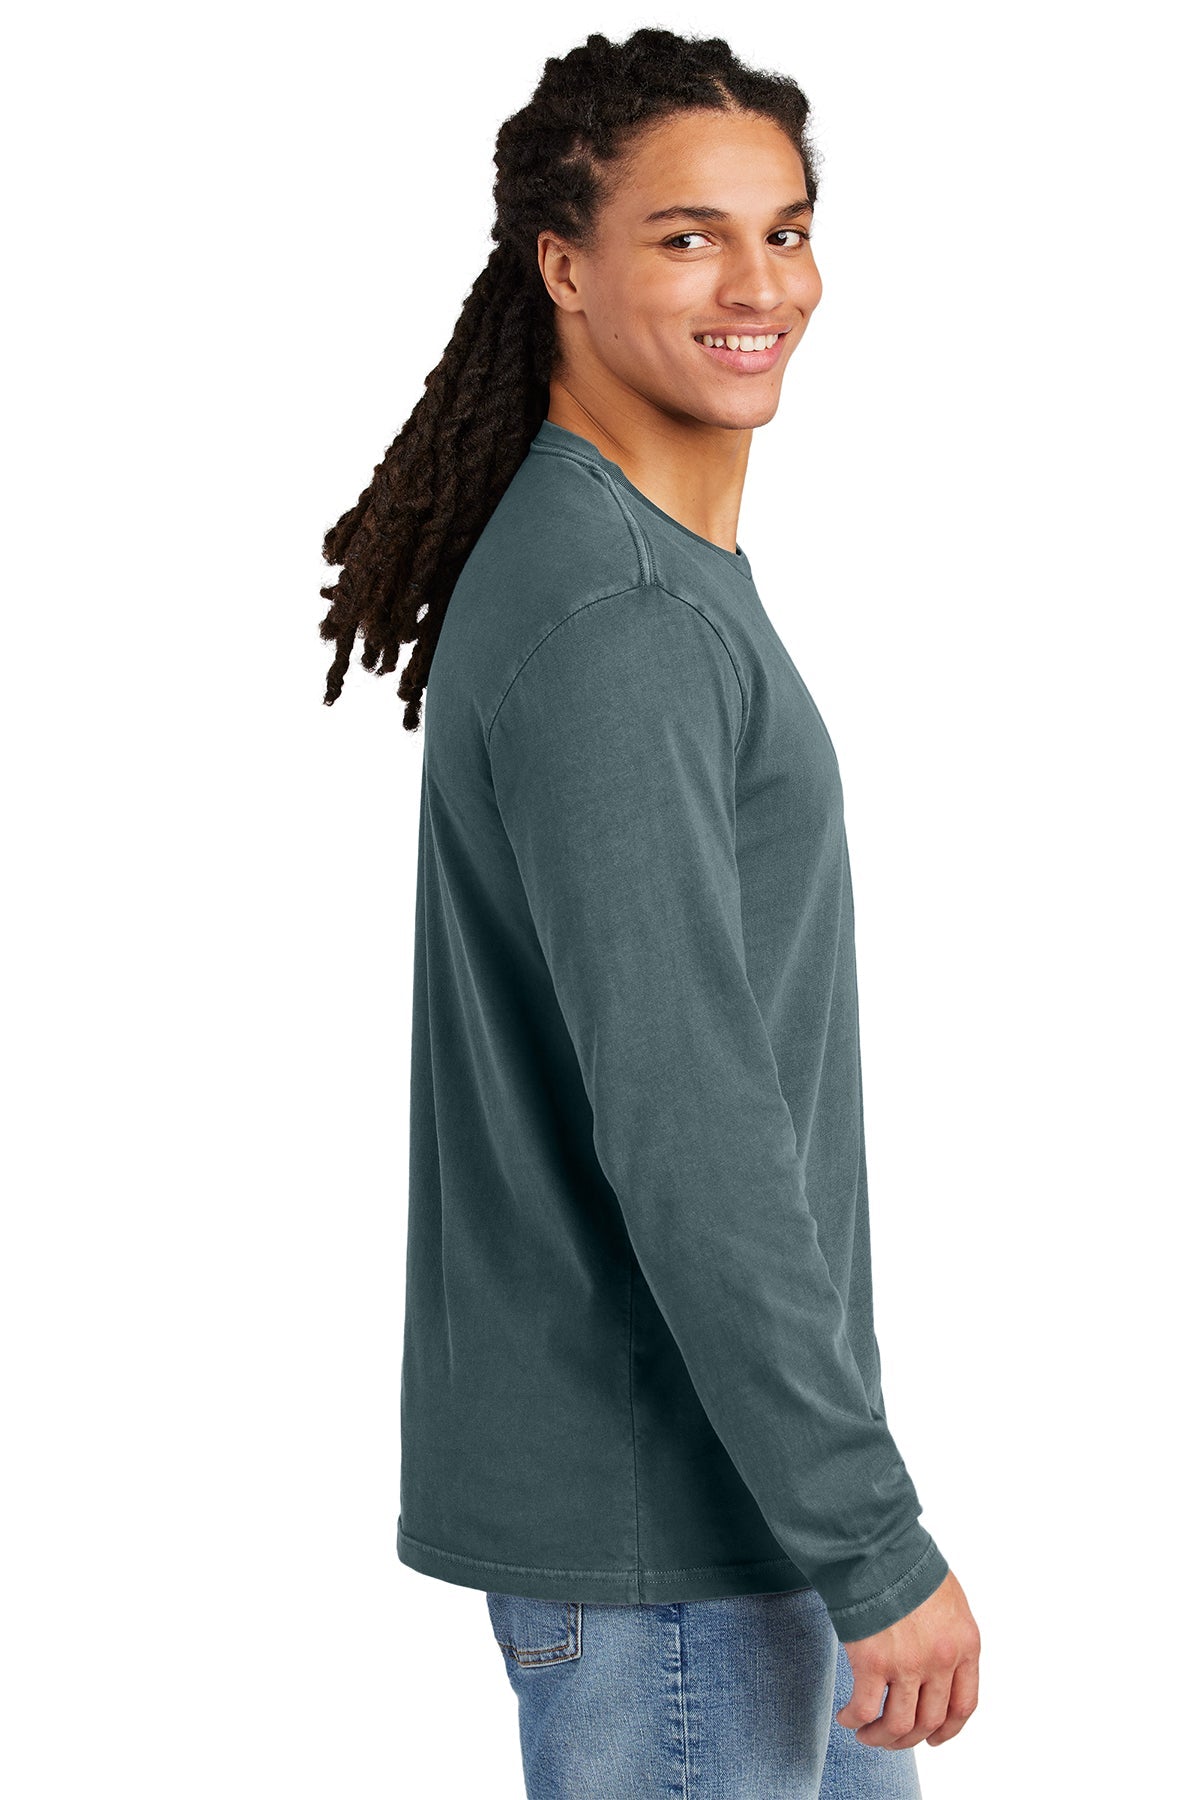 DT2103 District Wash™ Long Sleeve Tee